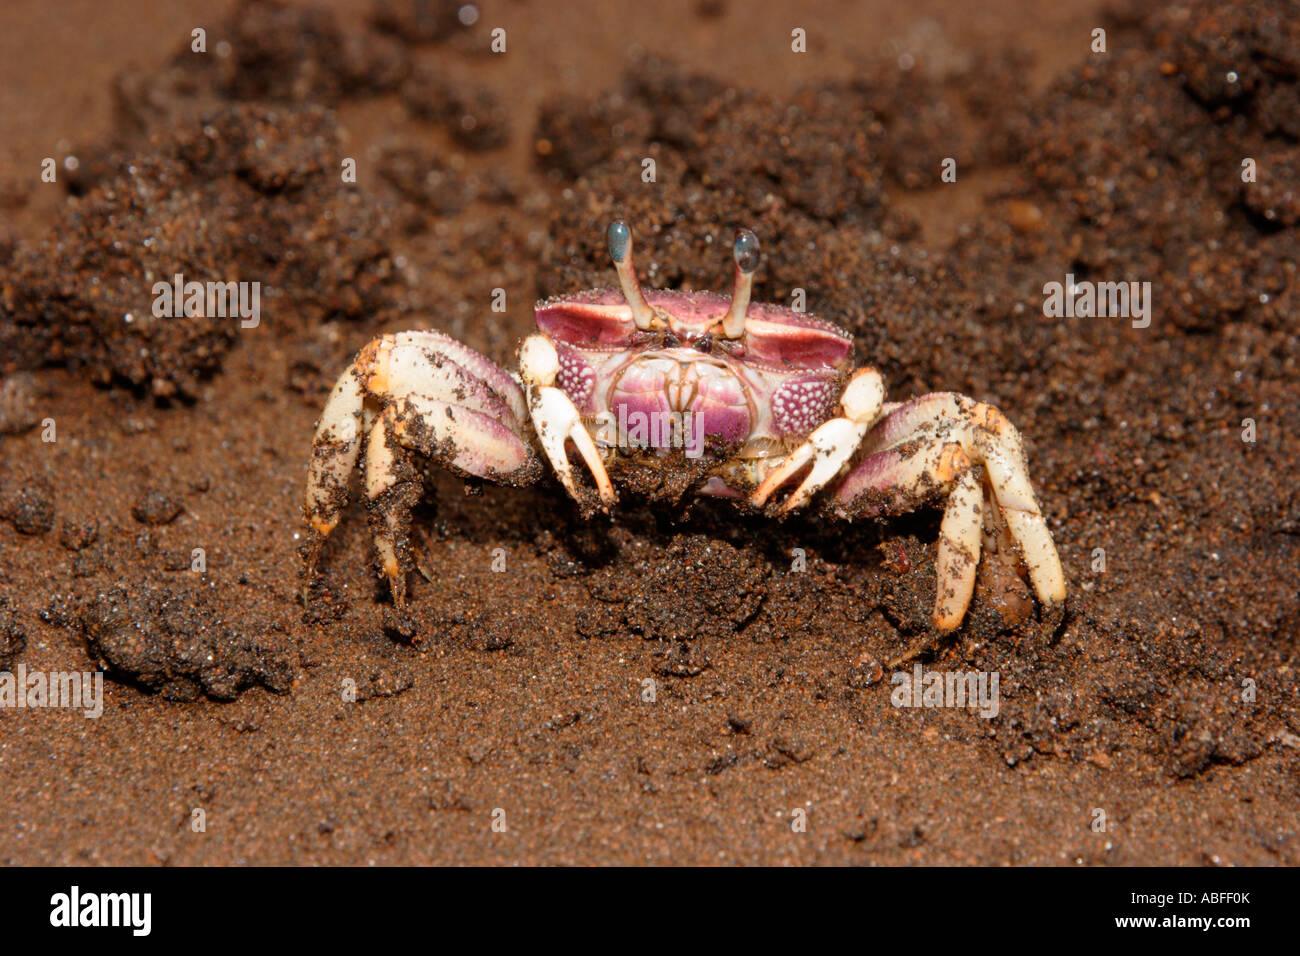 Fiddler crab Uca sp female picking up sand and eating it Cameroon